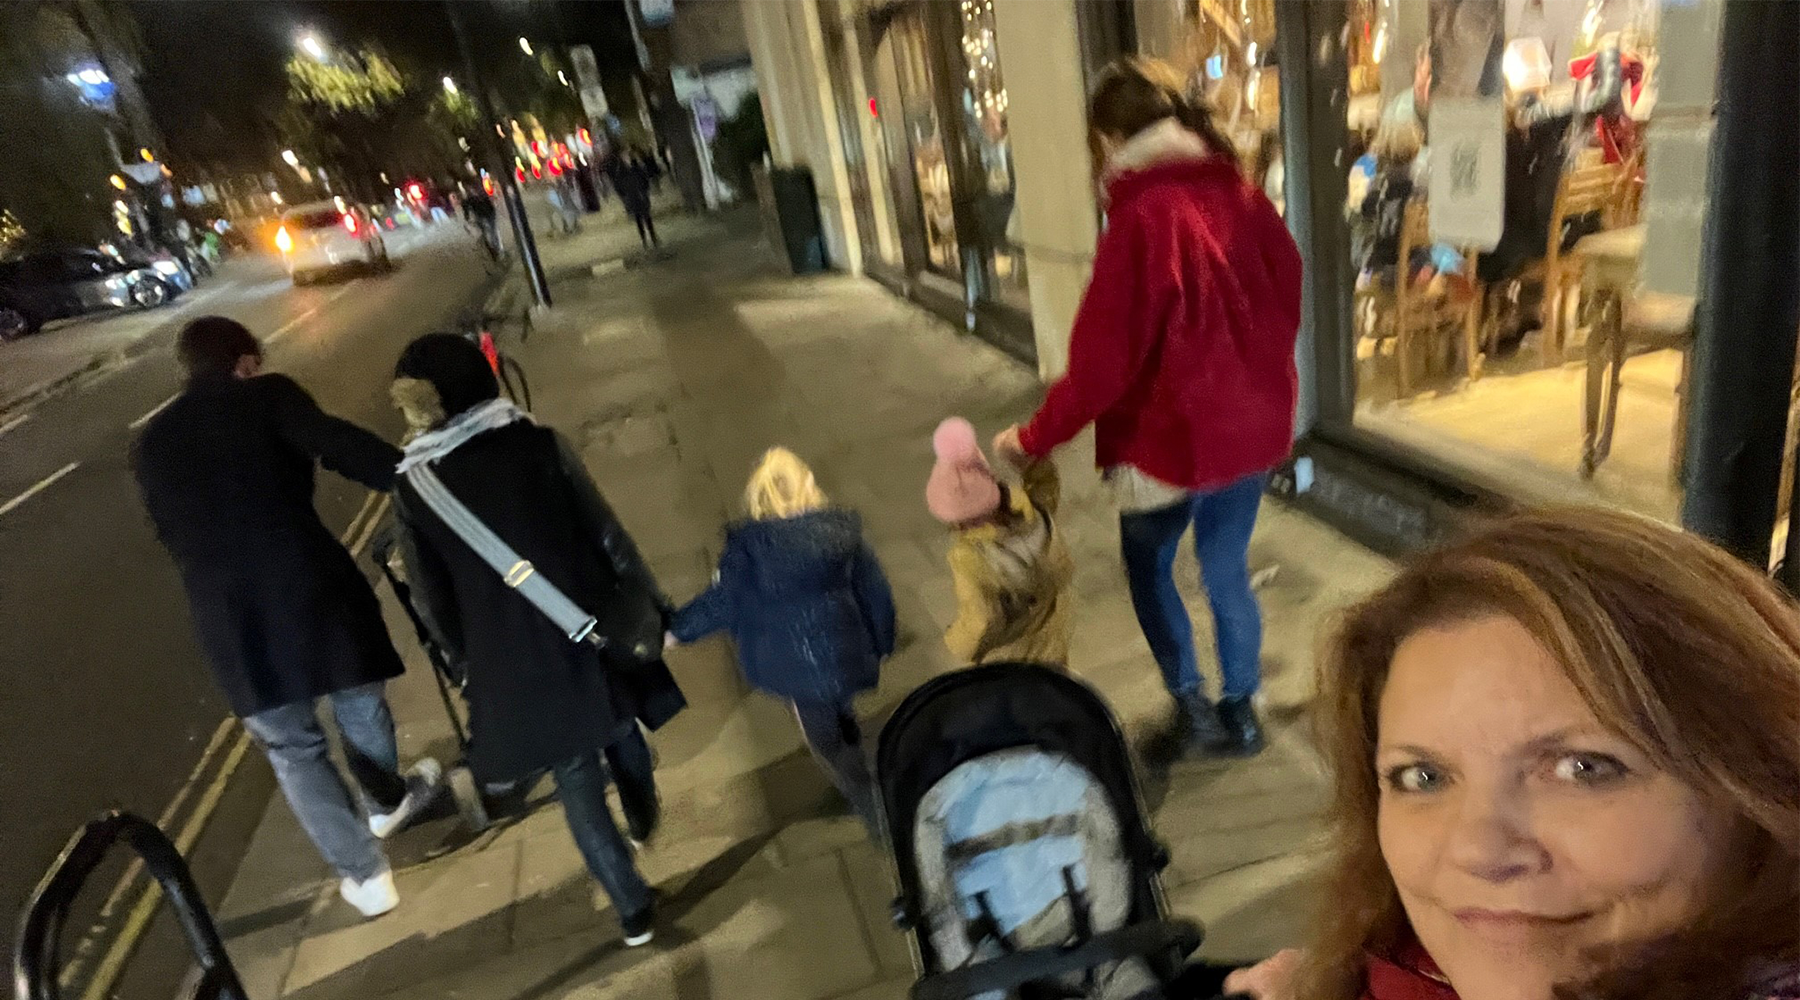 Debbie and her family walking down a high street